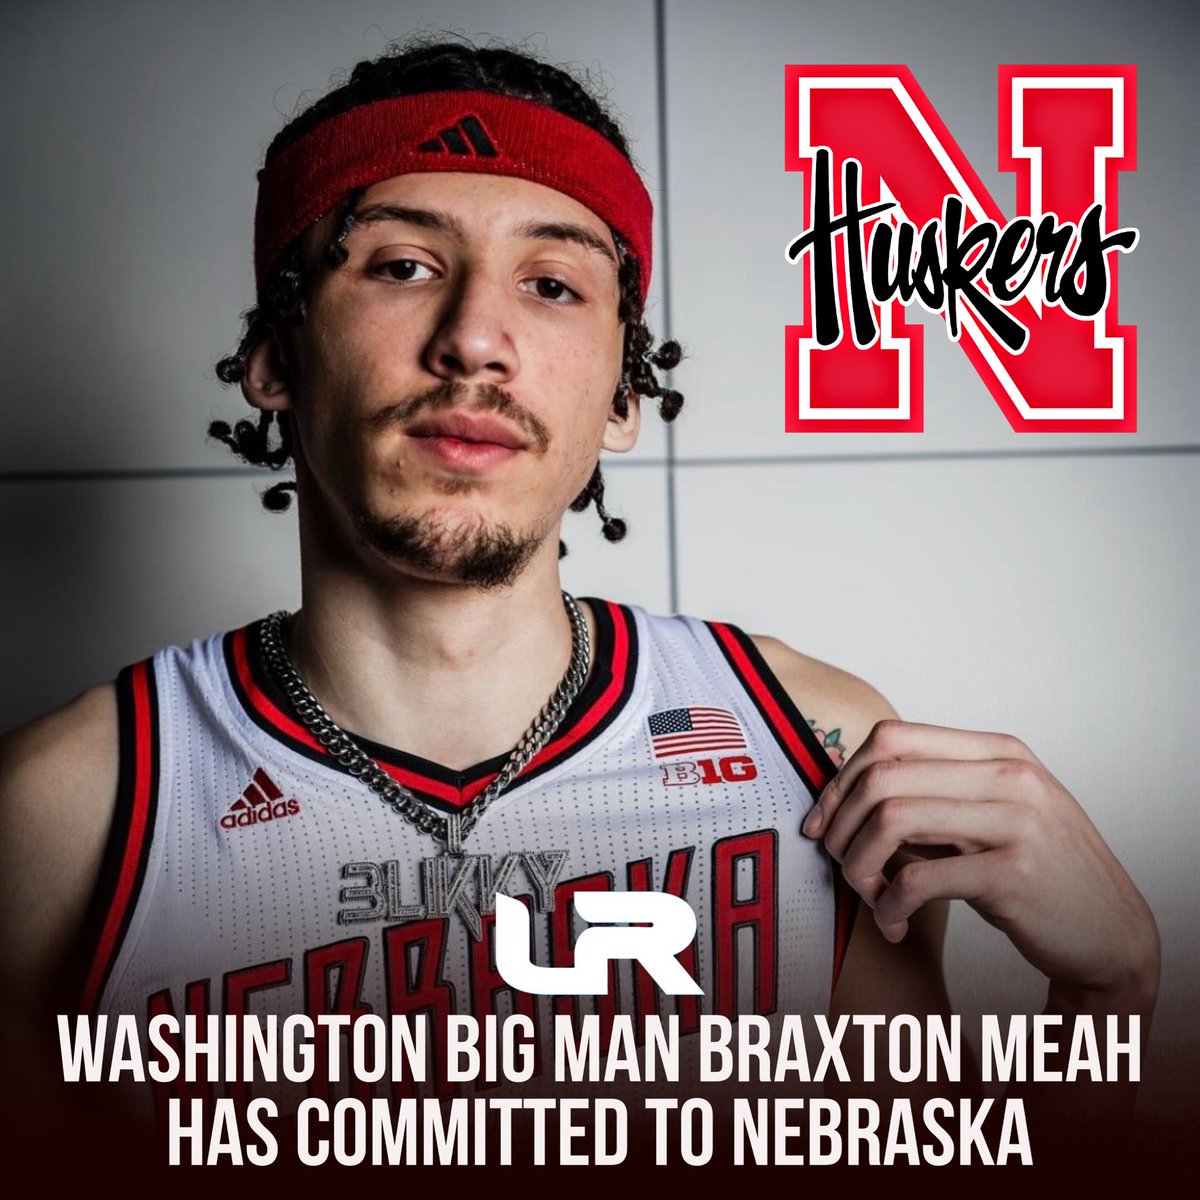 NEWS: Washington transfer Braxton Meah has committed to Nebraska, he announced. Meah began his career at Fresno State before spending the last two at Washington. Started 47 games the last two seasons for the Huskies. He averaged 5.3PPG and 5.3RG this season on 77% from the